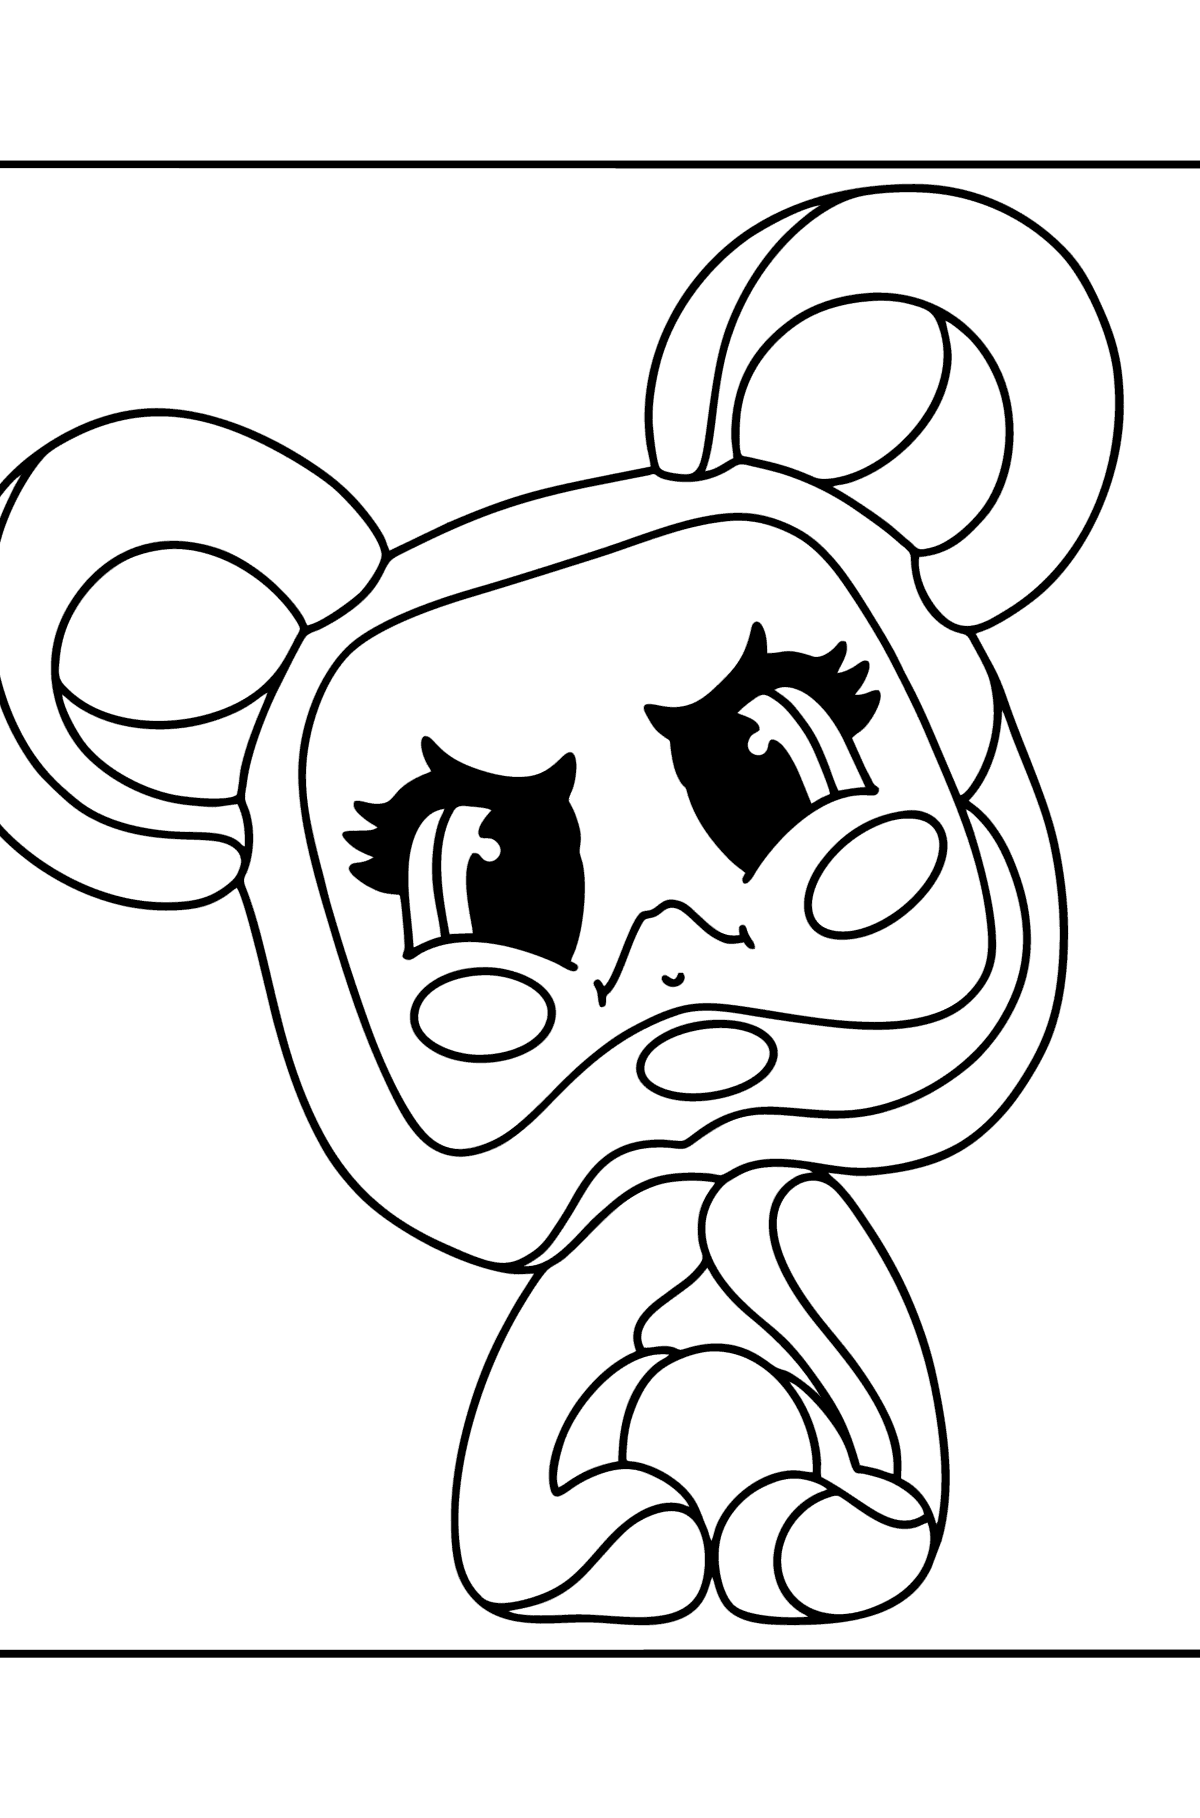 Coloring page MojiPops Squitty - Coloring Pages for Kids